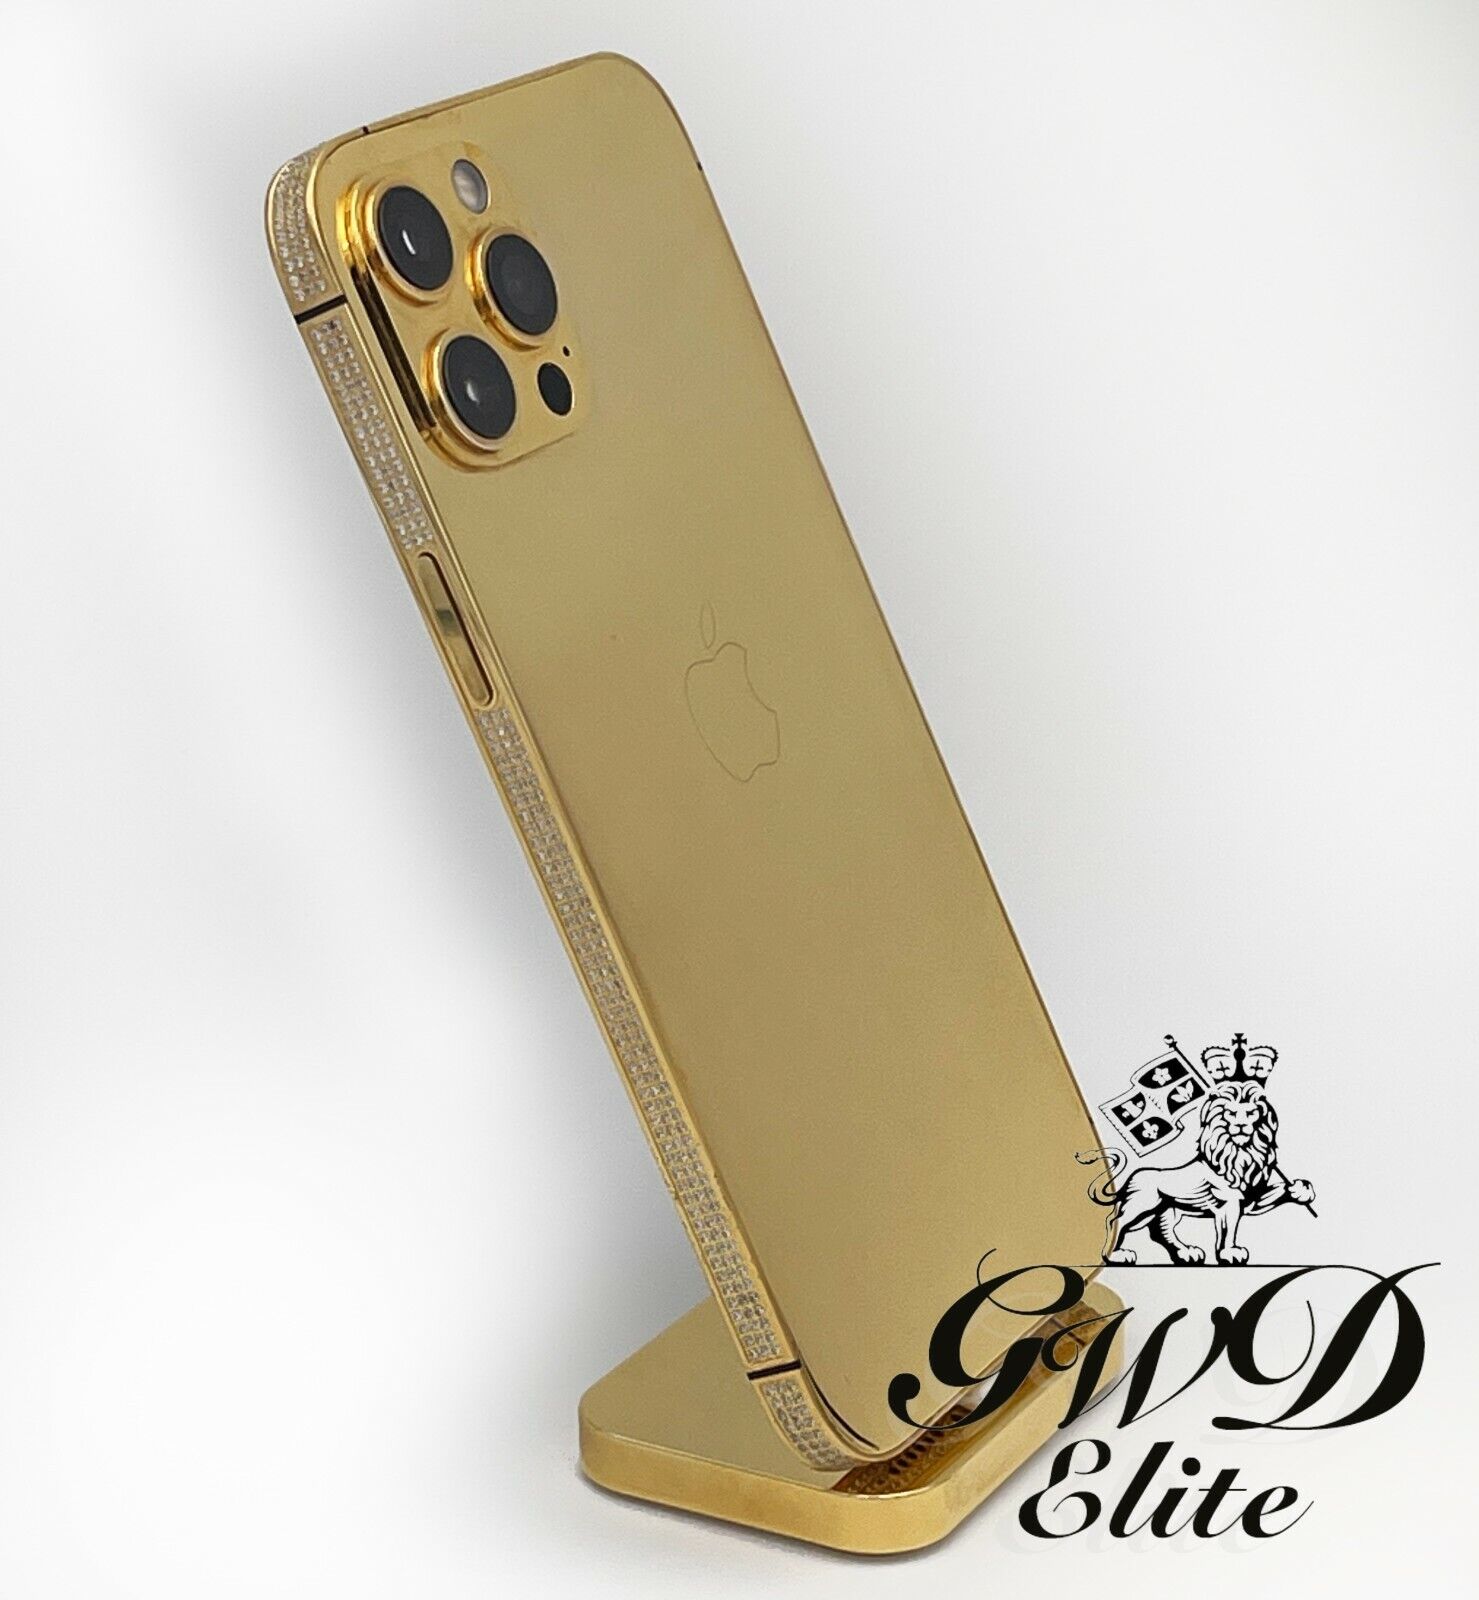 Custom iPhone 12 Pro 256GB with Diamond Bezel and 24k Gold Plated Back